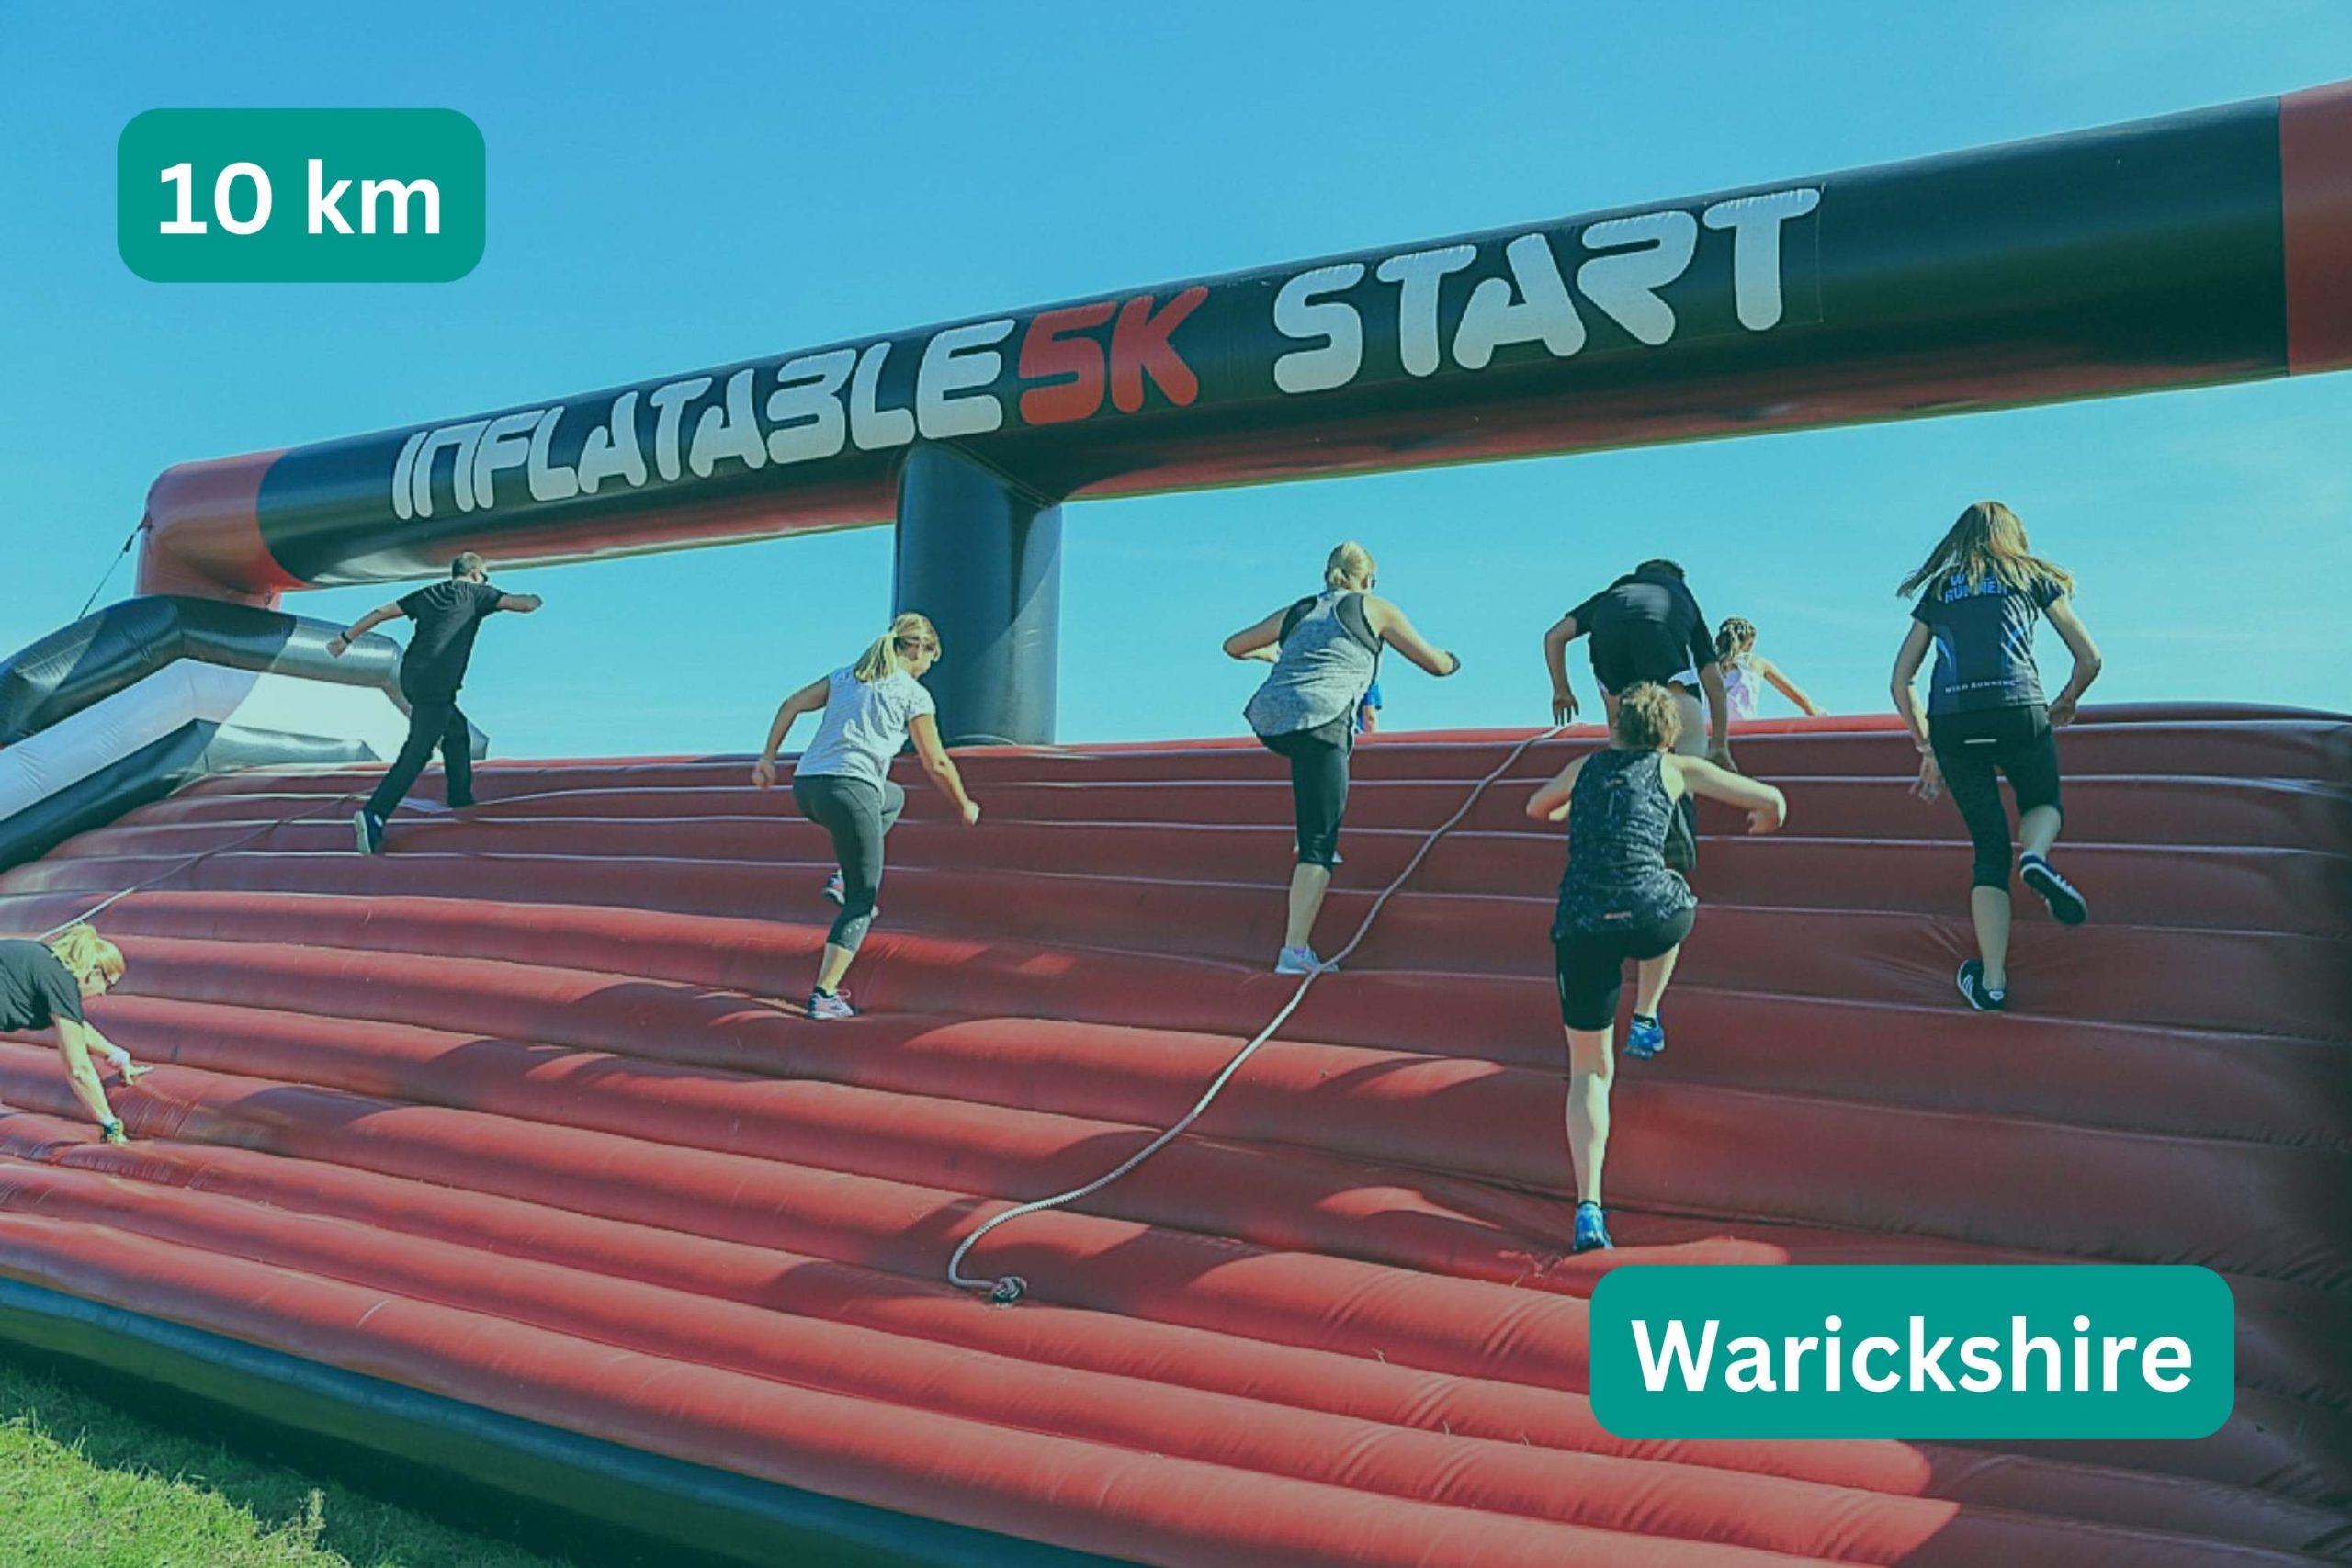 People running over inflatable obstical start line. Title text: 10km, Warickshire